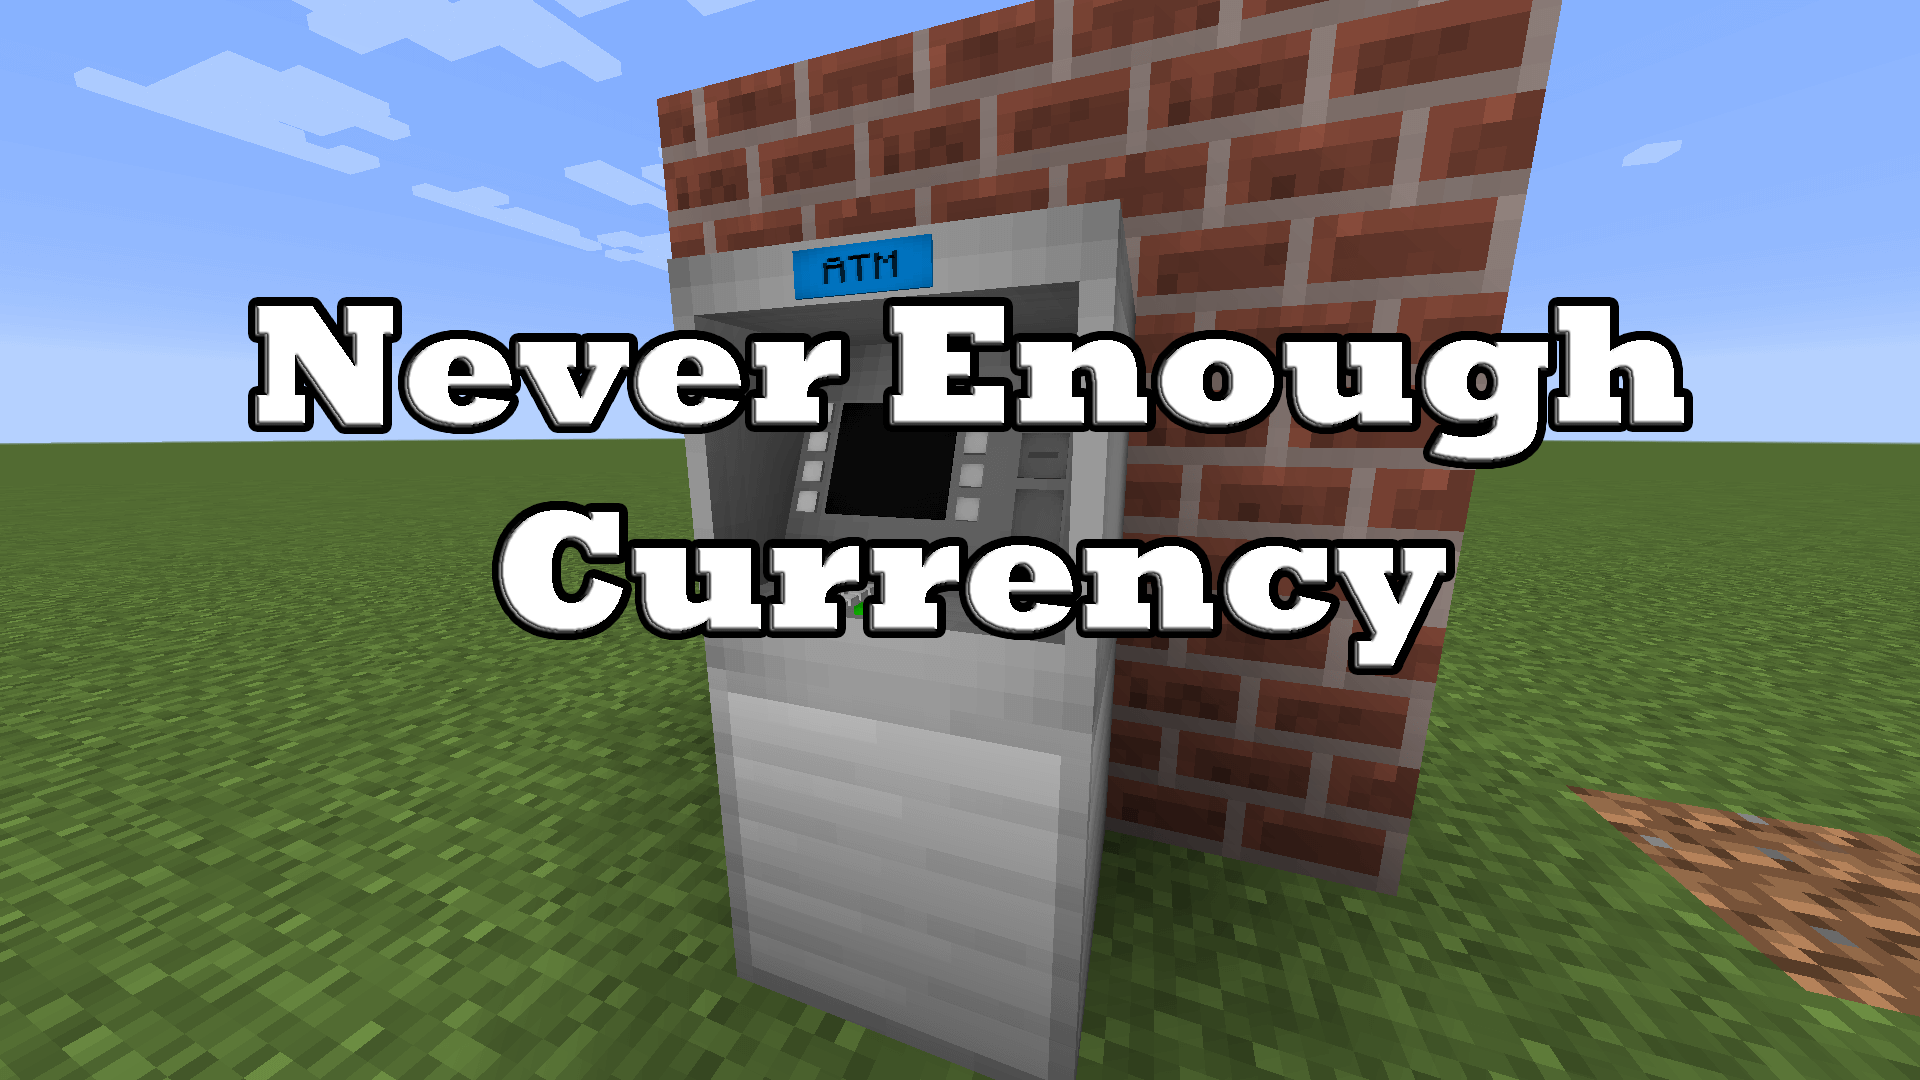 Currency мод 1.12.2. Мод never enough currency. Мод never enough currency деньги 1.12.2. Never enough currency 1.12.2 крафты.